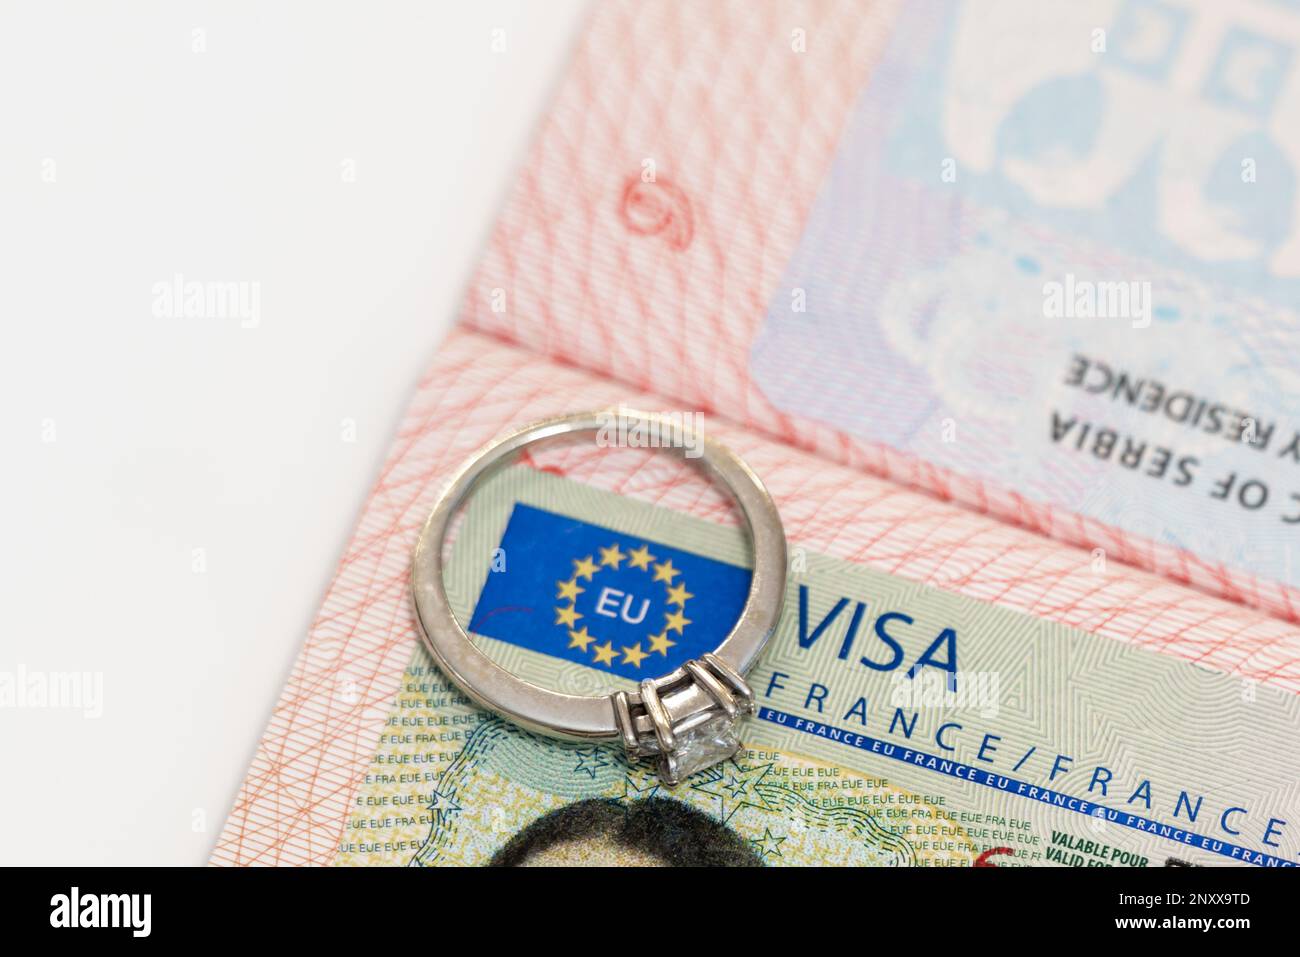 An engagement ring on a European visa stamp as a symbol of emigration or marriage Stock Photo